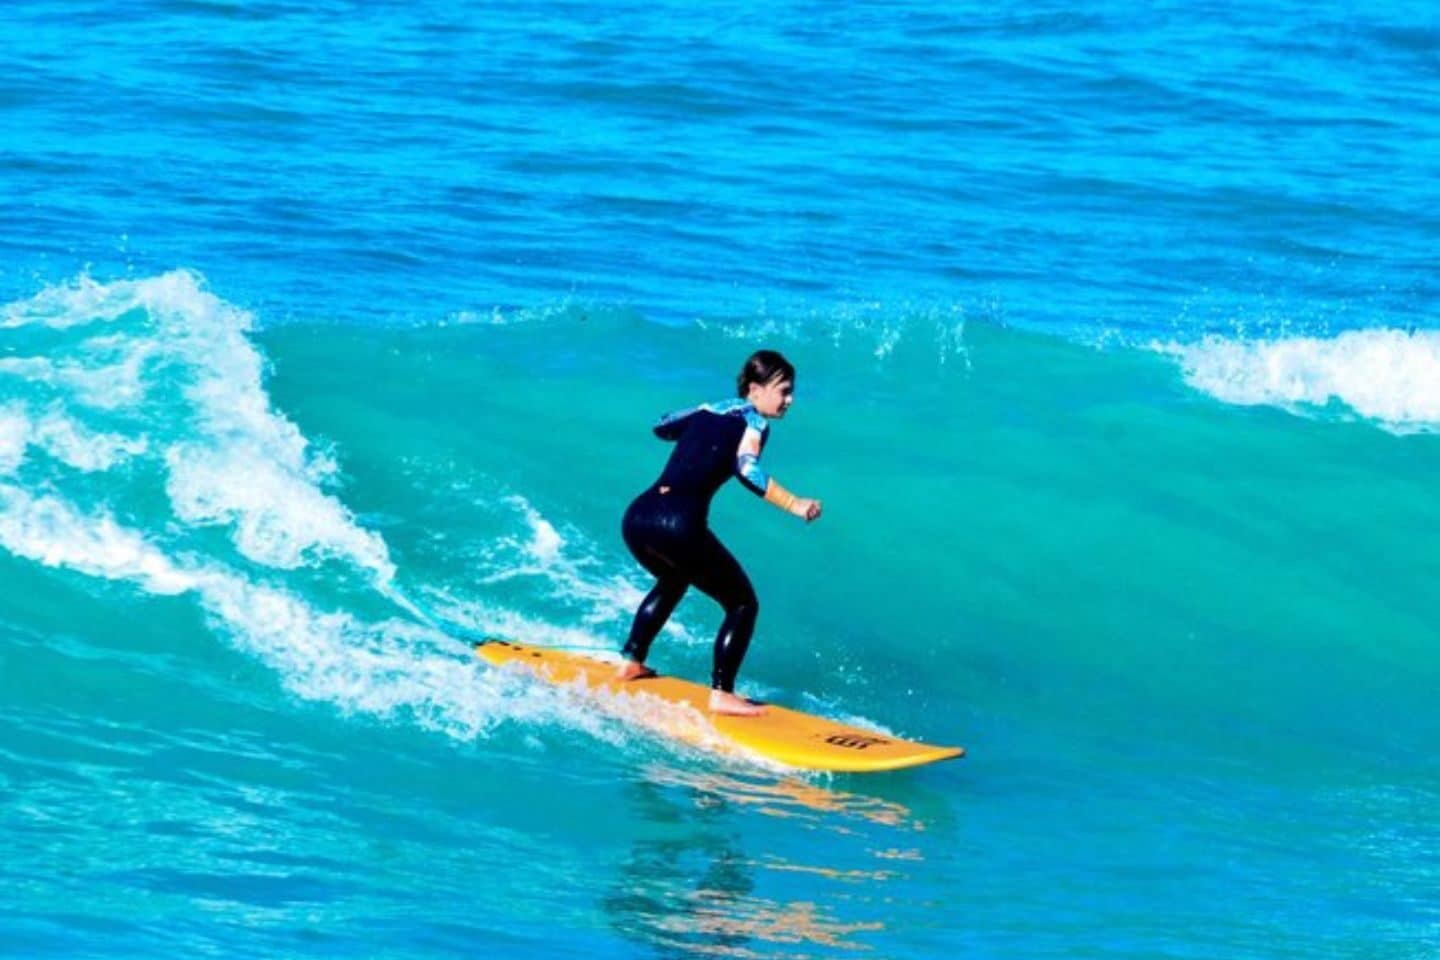 A surfer on top of a surfboard riding a wave in the beach